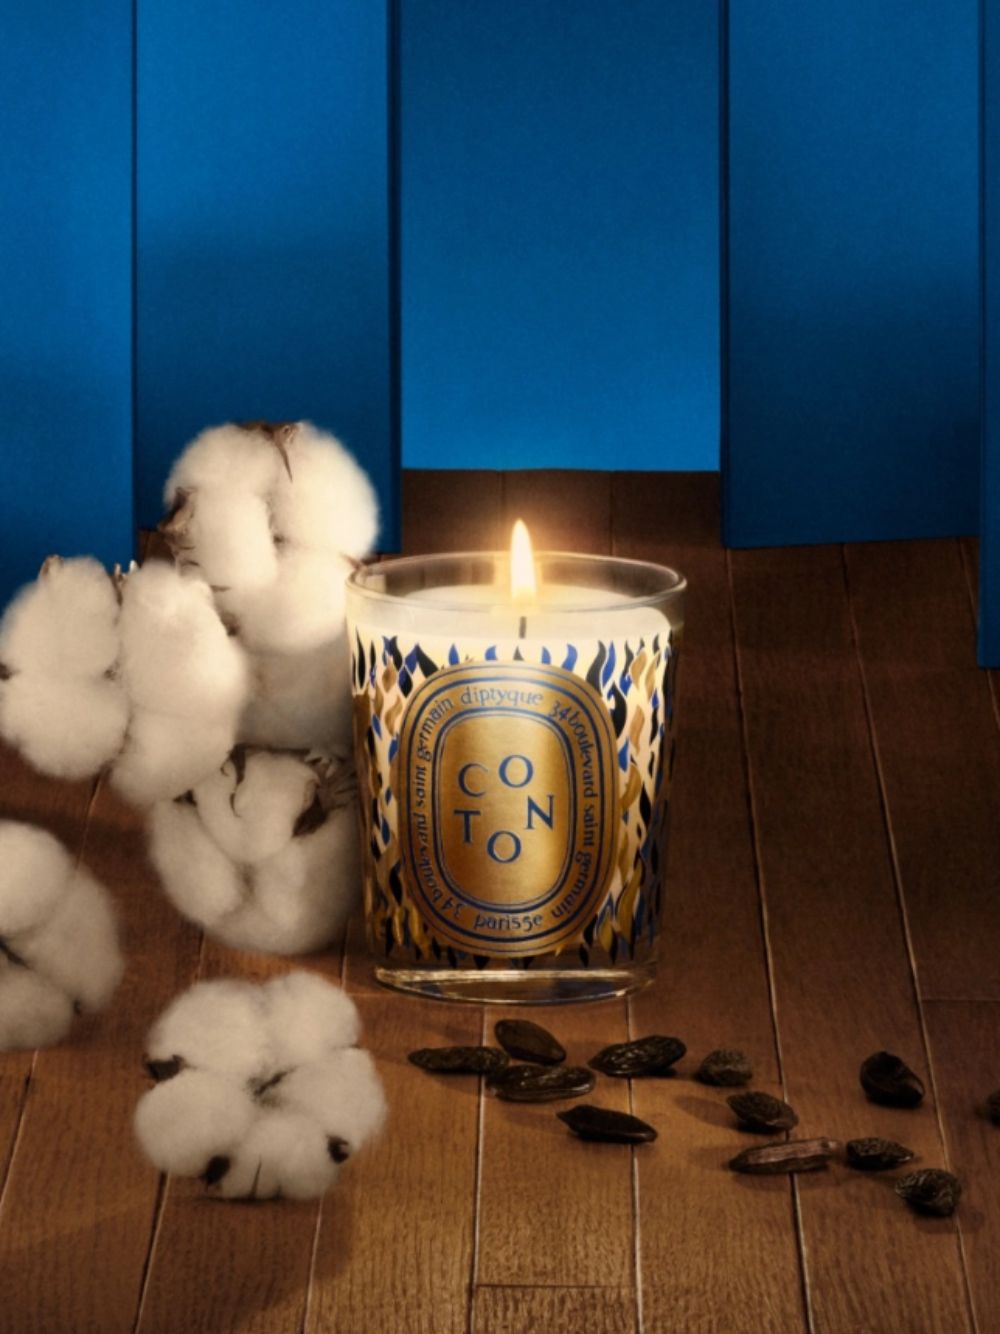 DiptyqueCoton Classic Candle 70g at Fashion Clinic